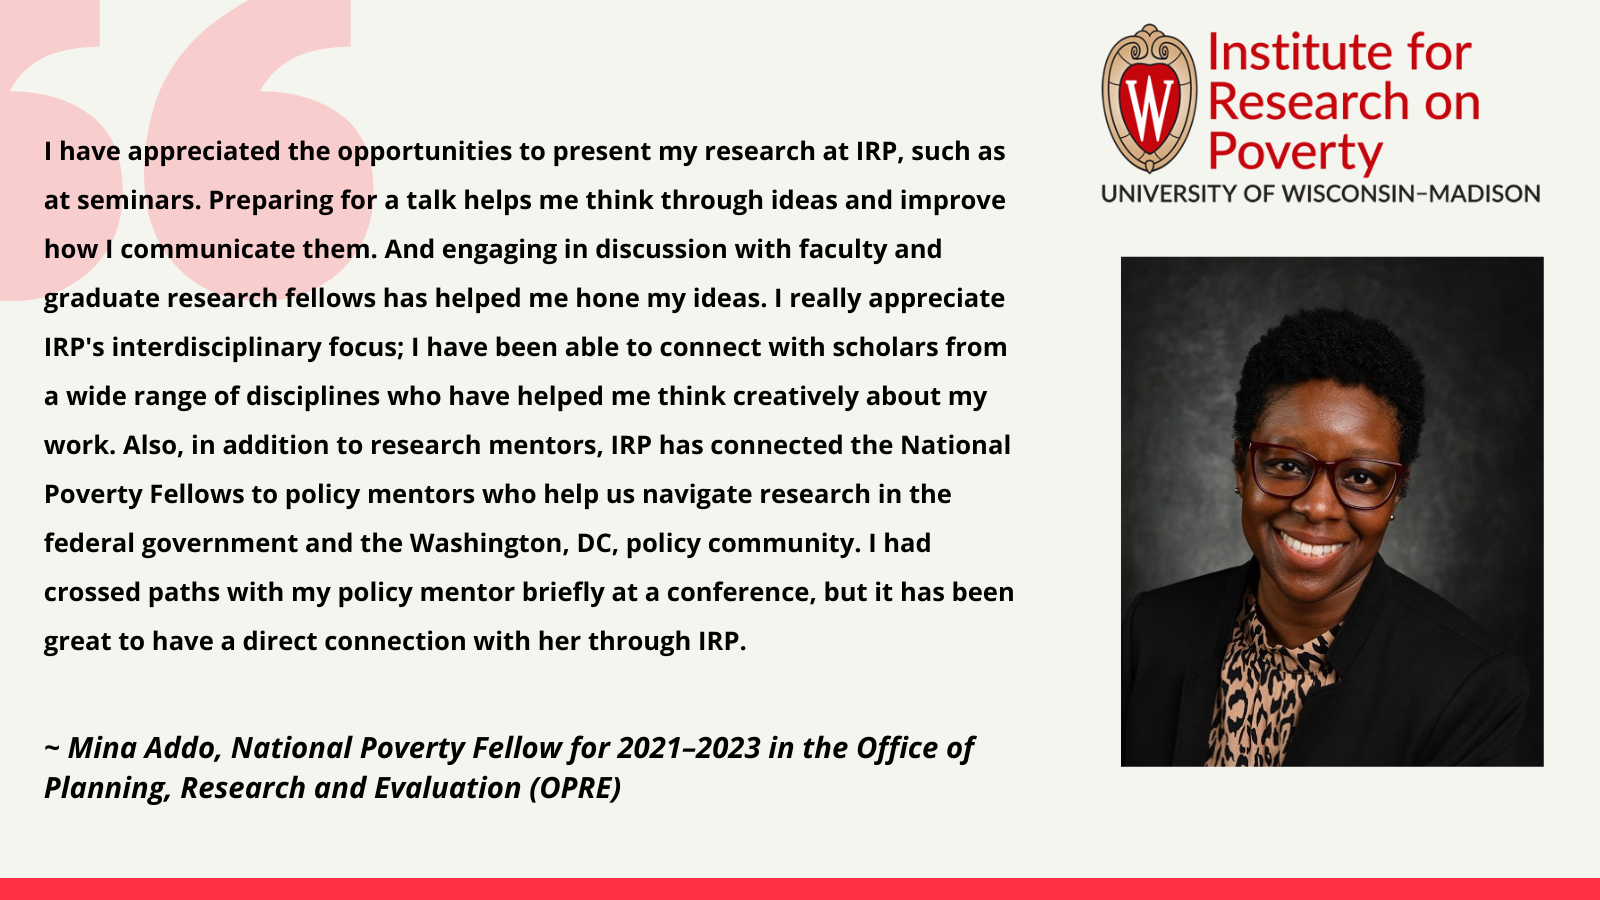 Mina Addo, 2021-2023 IRP National Poverty Fellow: I have appreciated the opportunities to present my research at IRP, such as at seminars. Preparing for a talk helps me think through ideas and improve how I communicate them. And engaging in discussion with faculty and graduate research fellows has helped me hone my ideas. I really appreciate IRP's interdisciplinary focus; I have been able to connect with scholars from a wide range of disciplines who have helped me think creatively about my work. Also, in addition to research mentors, IRP has connected the National Poverty Fellows to policy mentors who help us navigate research in the federal government and the Washington, DC, policy community. I had crossed paths with my policy mentor briefly at a conference, but it has been great to have a direct connection with her through IRP.